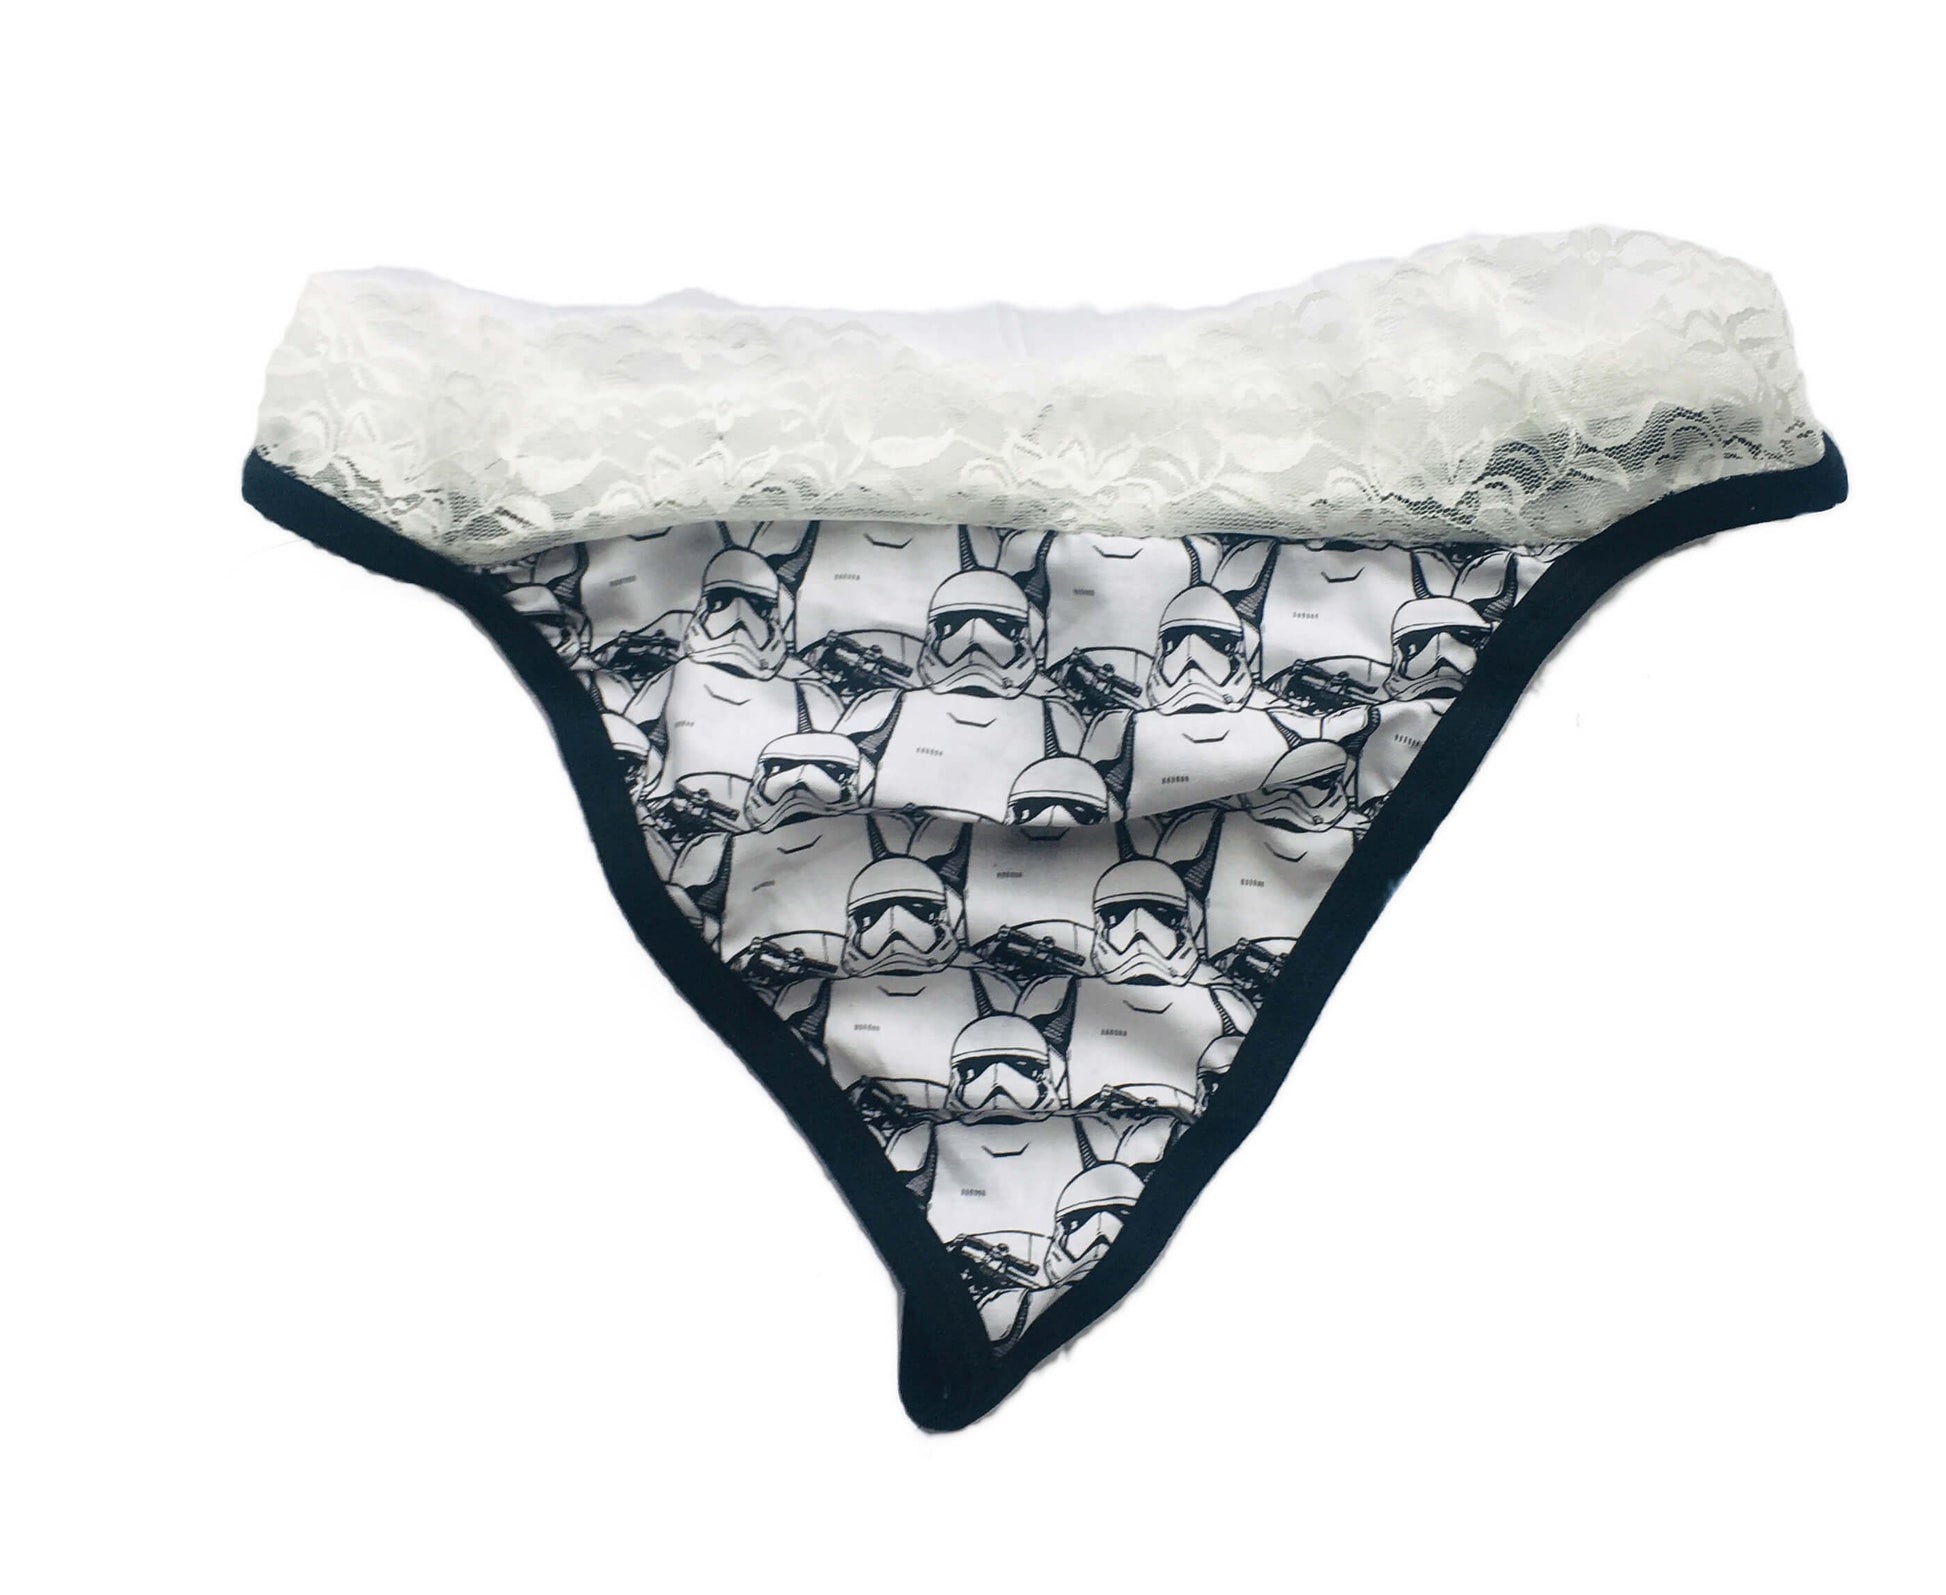 Geometric Star Wars Cotton Essential Thong in Rainbow – Violet Pursuit